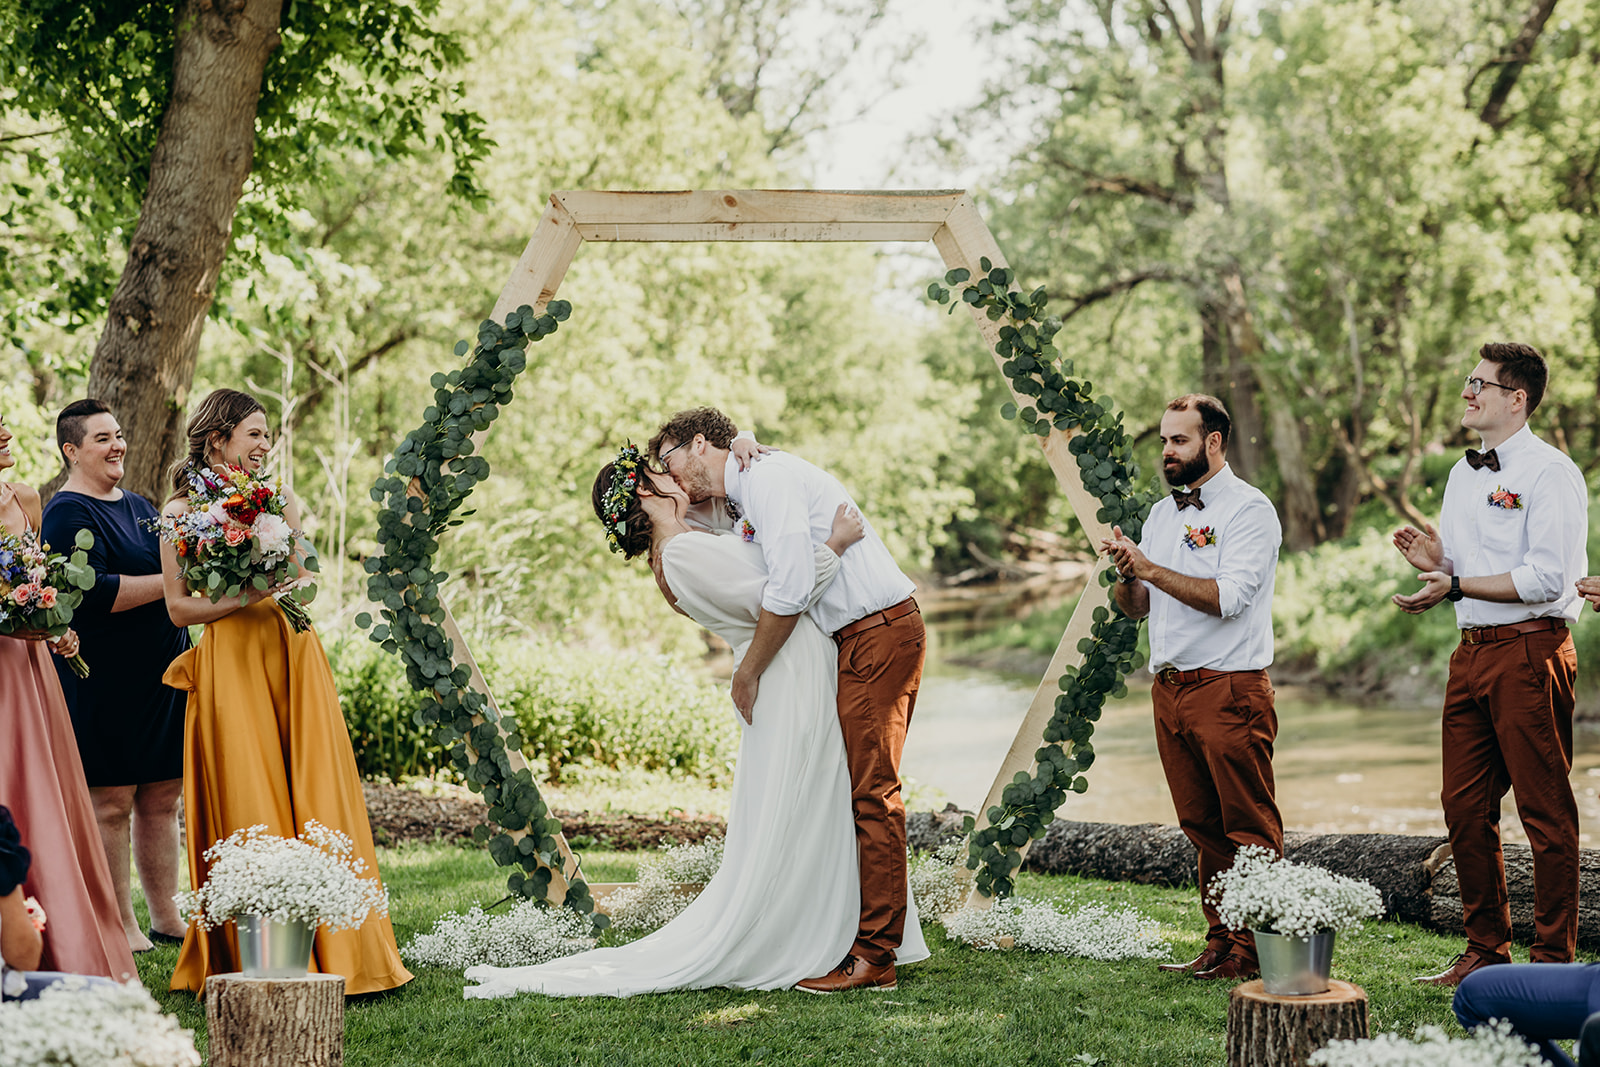 The river side ceremony in the perfect shaded spot for a backyard wedding